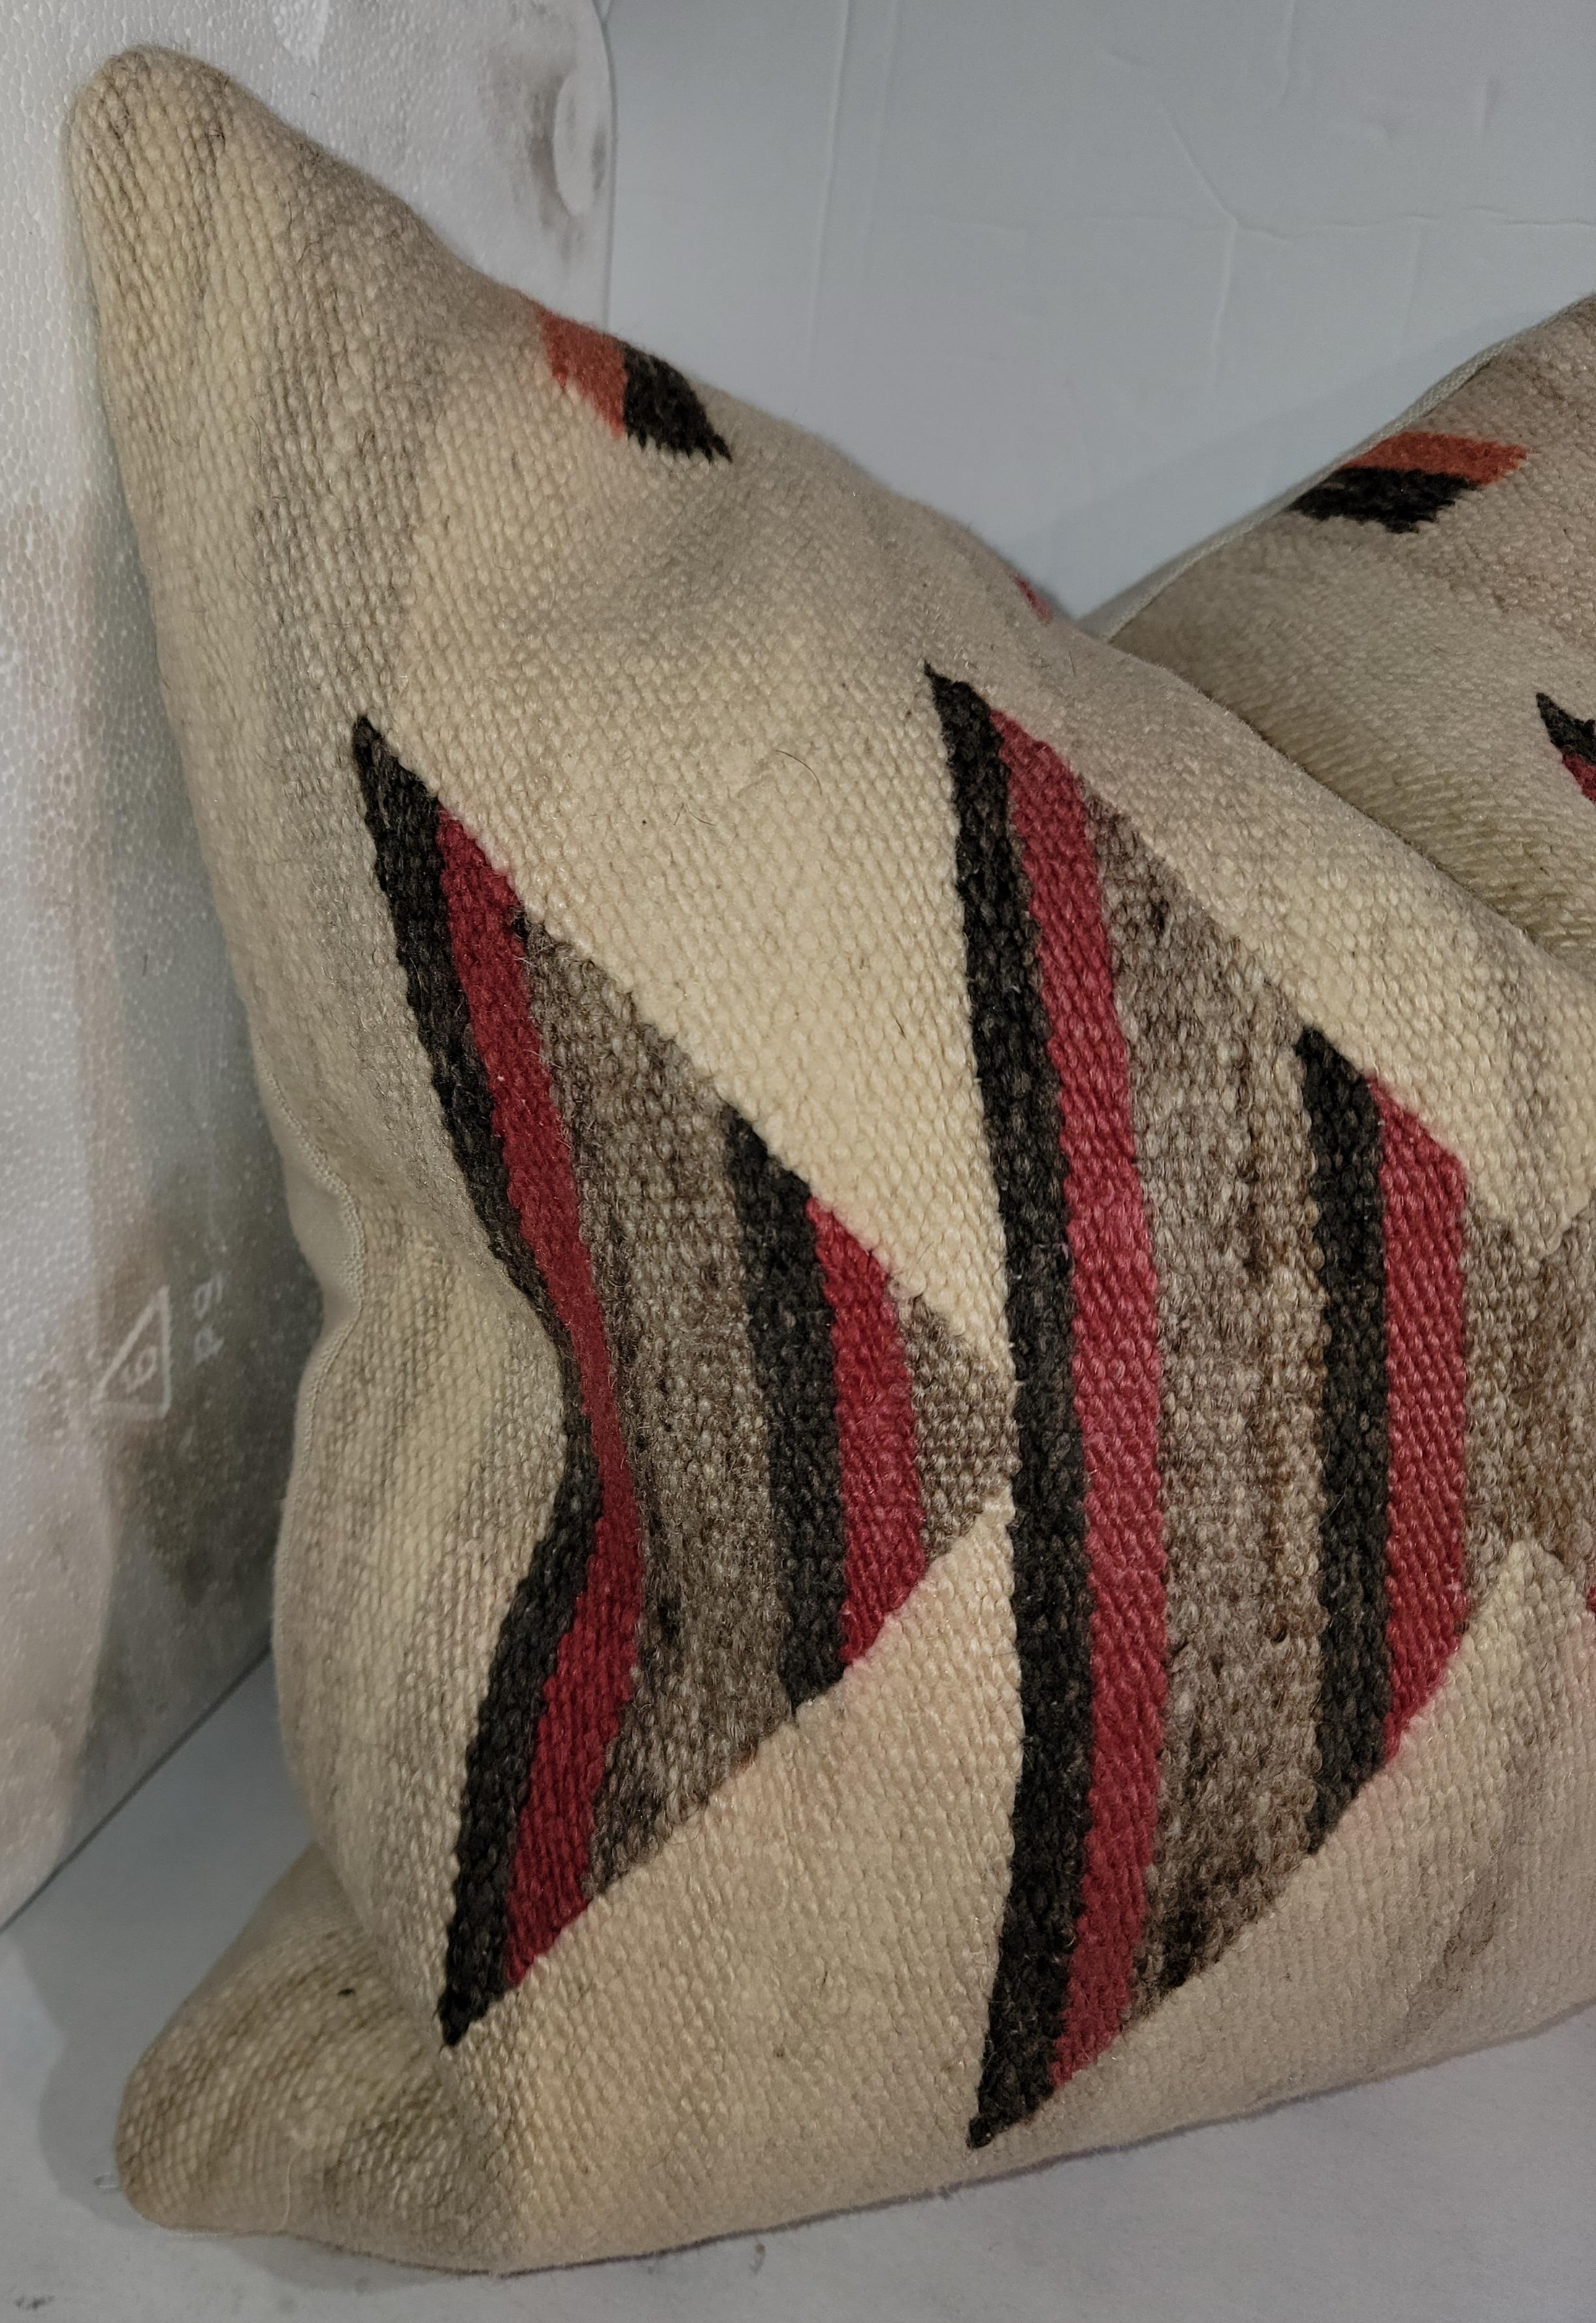 Beautiful beige background with multi color geese pattern pillow. This pillow is a great reminder if the what can be when showing reds black and neutral grays within a chosen limited pattern. Beautiful simple design choices catch your eyes. Beige